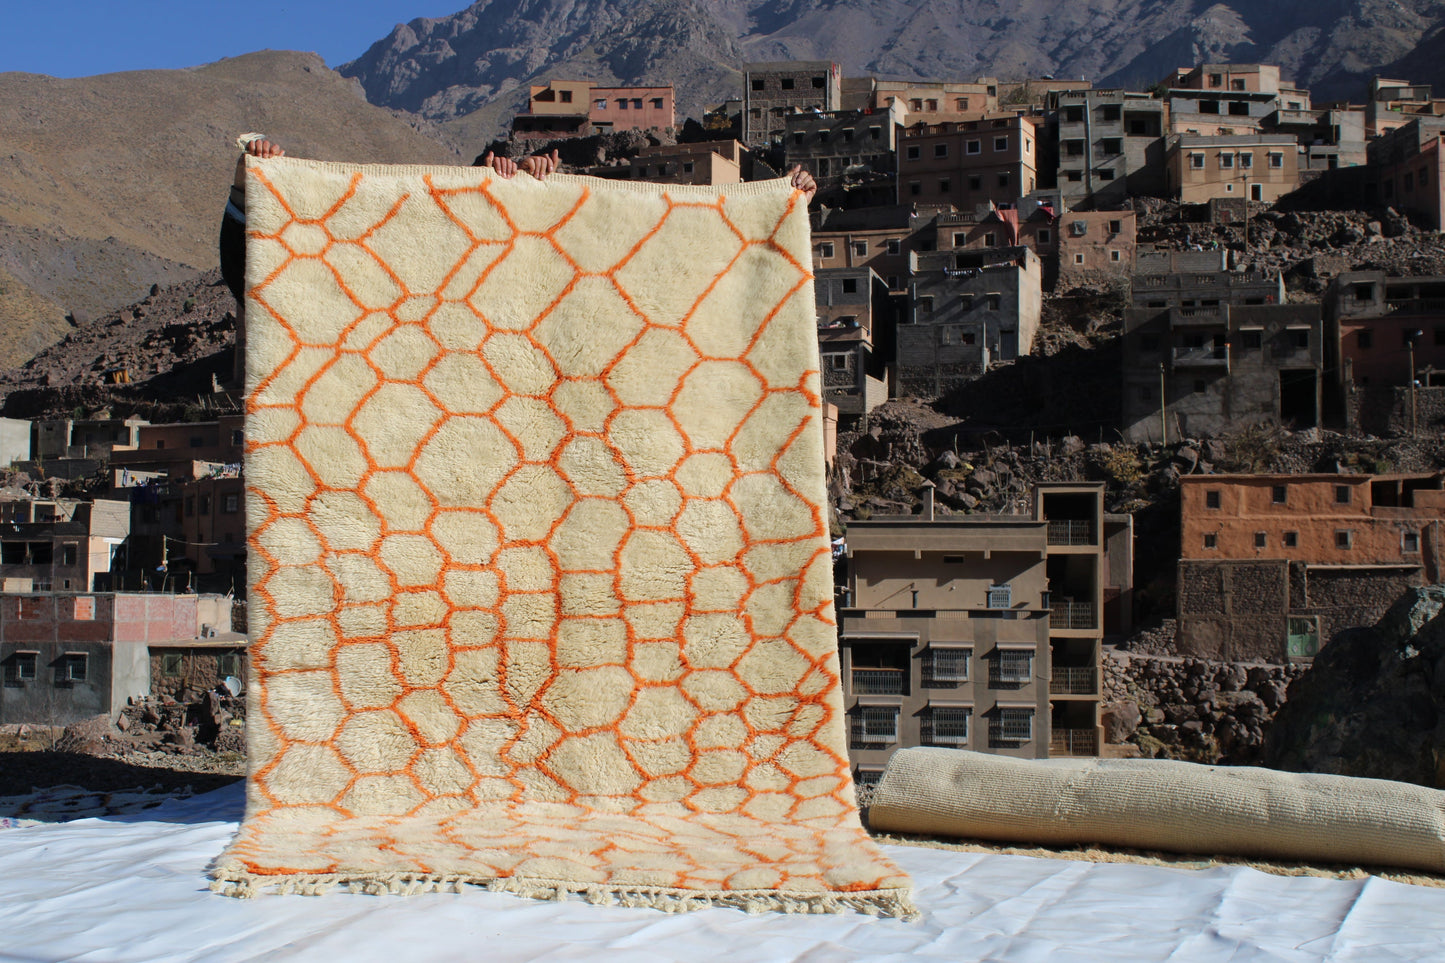 Beni Ourain rugs originate from the Atlas Mountains of Morocco and are characterized by their distinctive, neutral-toned, and geometric designs. These handwoven rugs often feature a plush pile and are made by the Berber tribes,  size is 255x155 cm